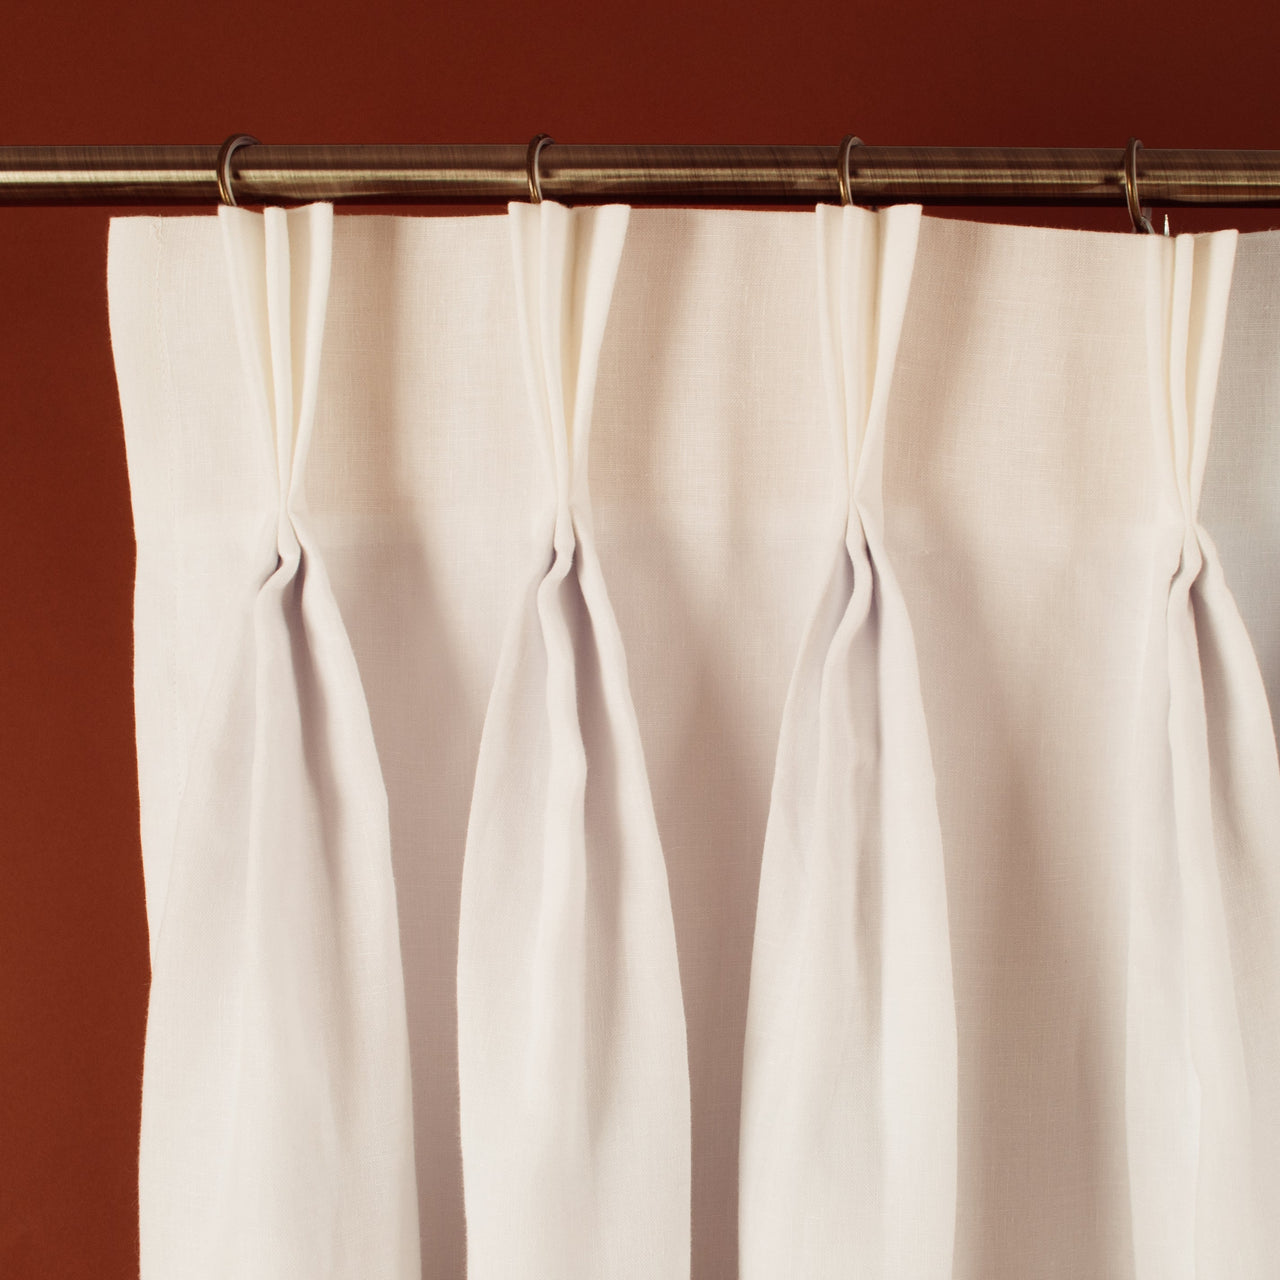 Triple Pinch Pleat Linen Curtain Panel with Blackout Lining - Tailored and Classic Look Drape